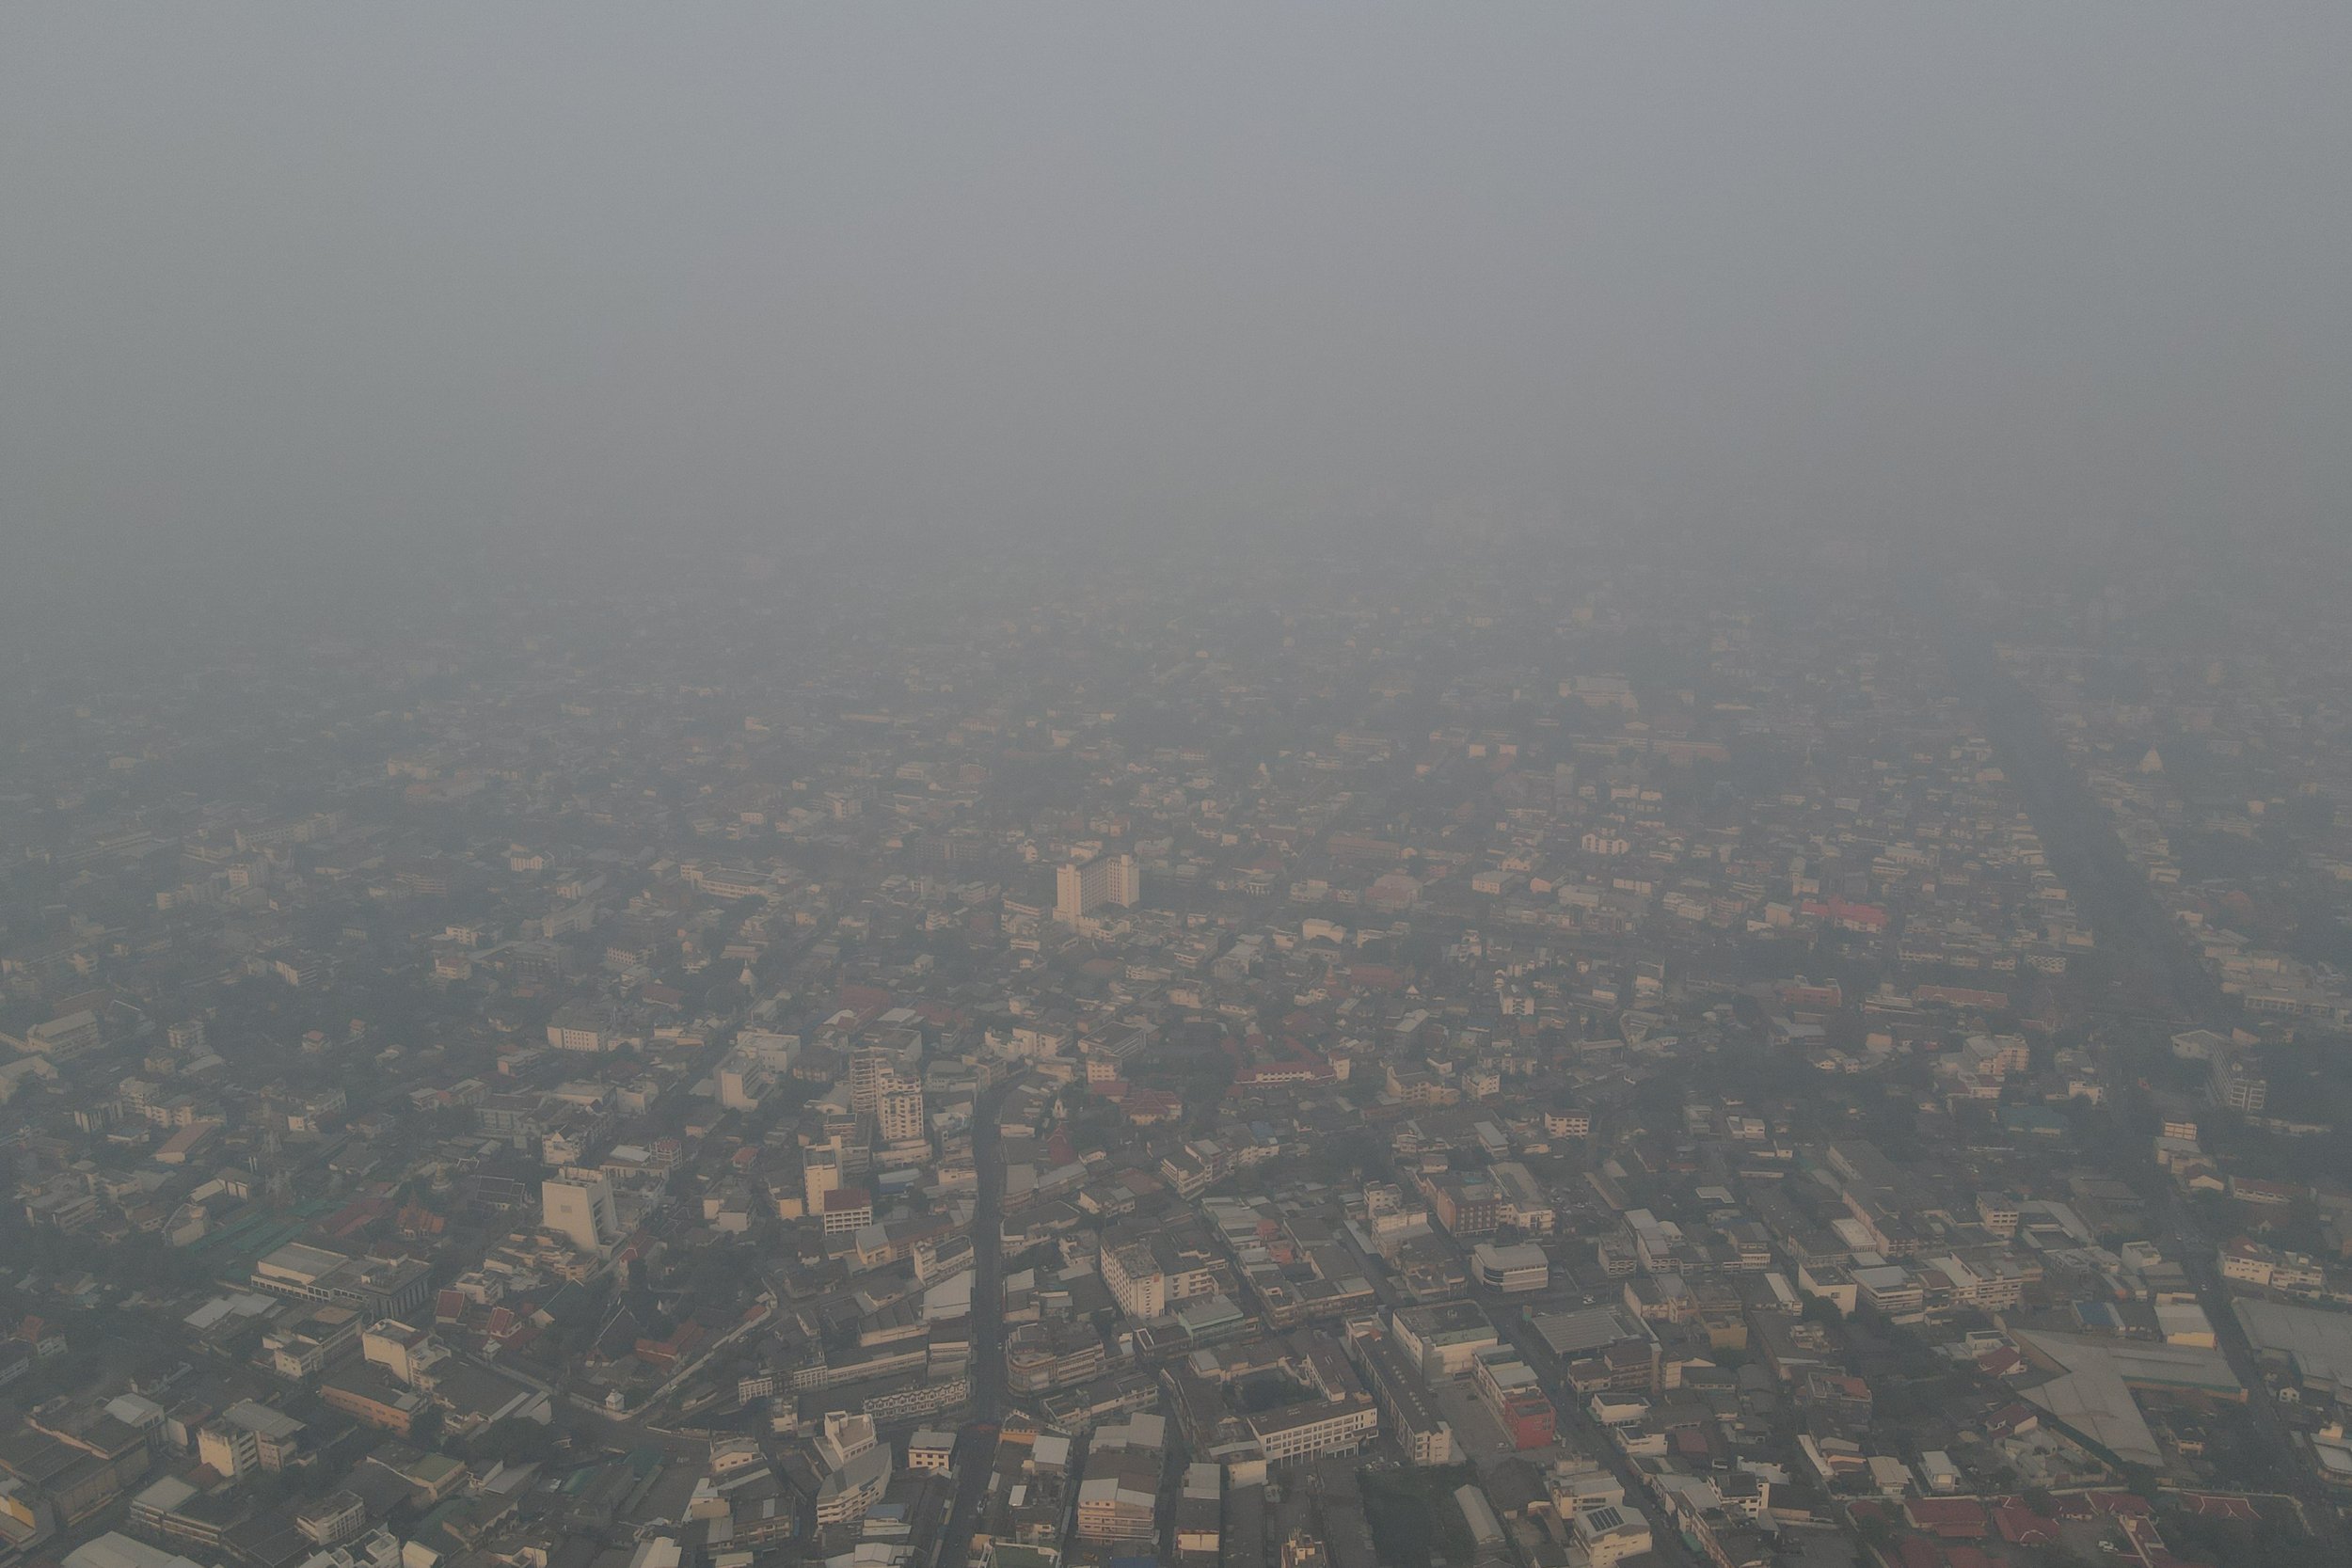  Thailand, Chiang Mai. 2 April 2023. Chiang Mai City is blanketed in toxic smog of PM2.5 particles from burning fields and forests exceeding 400 AQI levels (air quality data measured by the app Air Visual). The city has been ranked as the most pollut